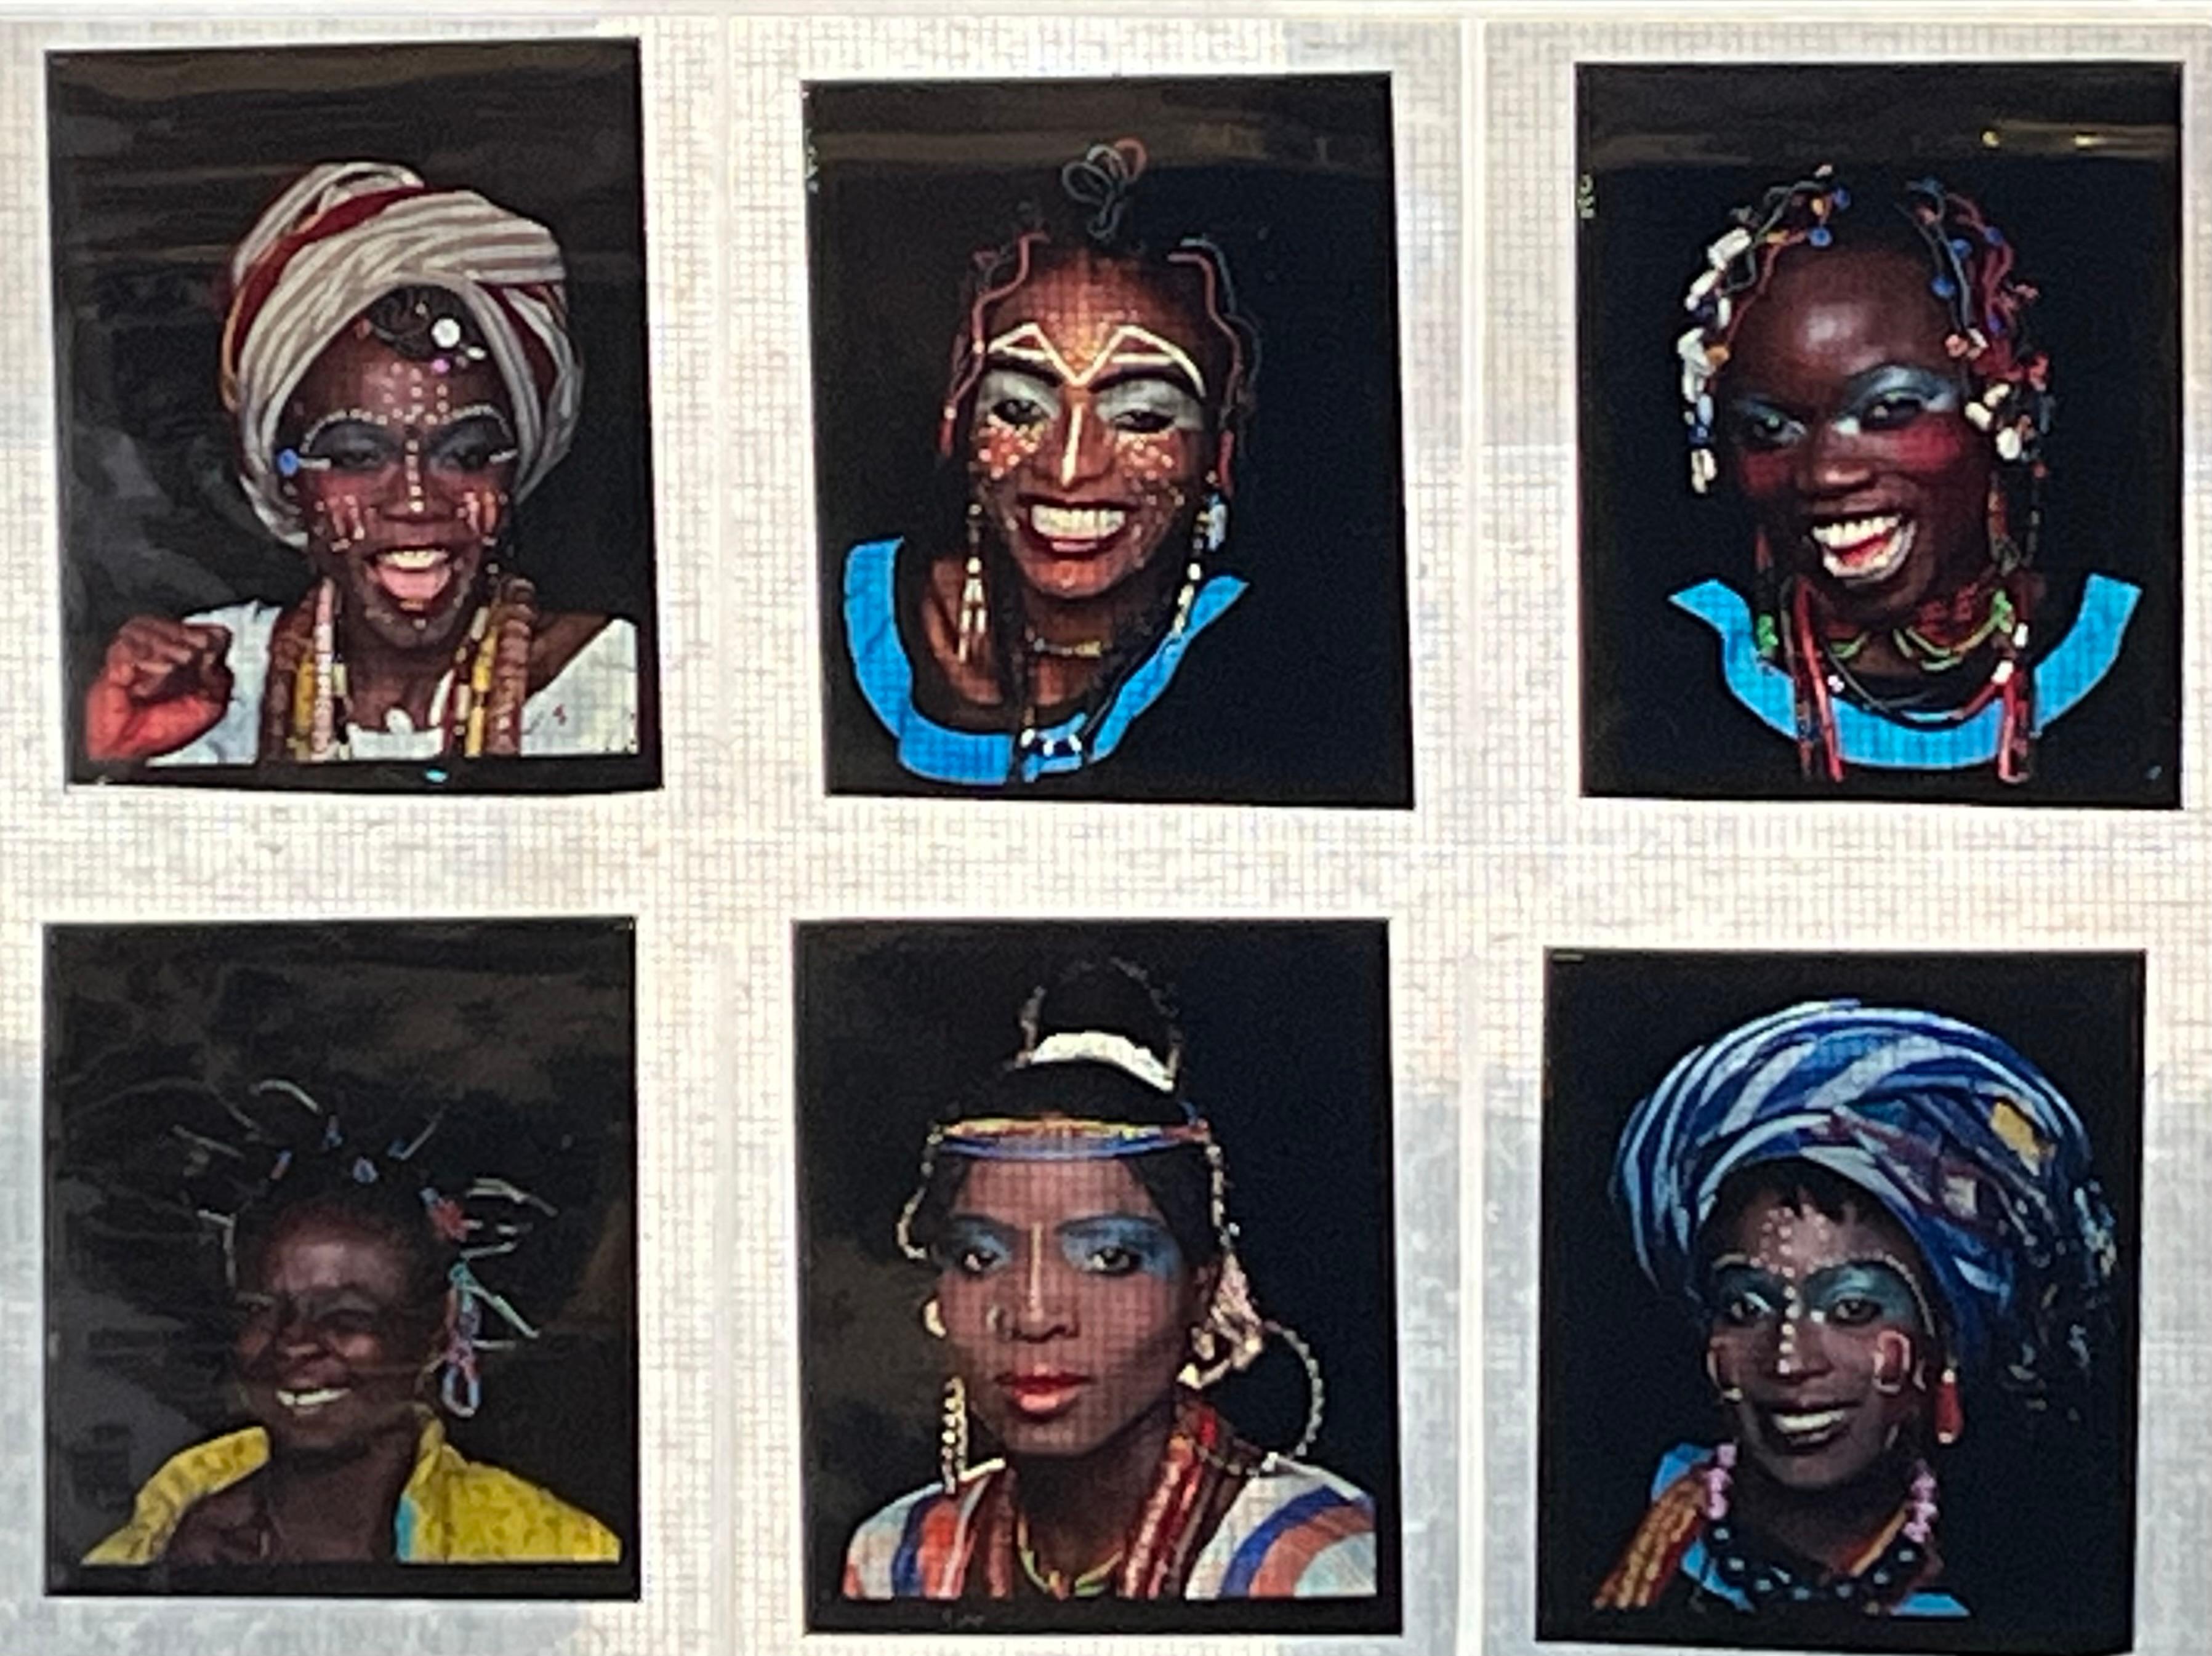 Fela Kuti: A rare vintage collection of: 

2 darkroom publicity photos circa ealry/mid 1980s. Each measuring 5x7 inches.

15+ 35mm transparencies of Fela performing live circa early/mid 1980s.

Six 2.25 transparencies of Fela's dancers.

Unsigned;